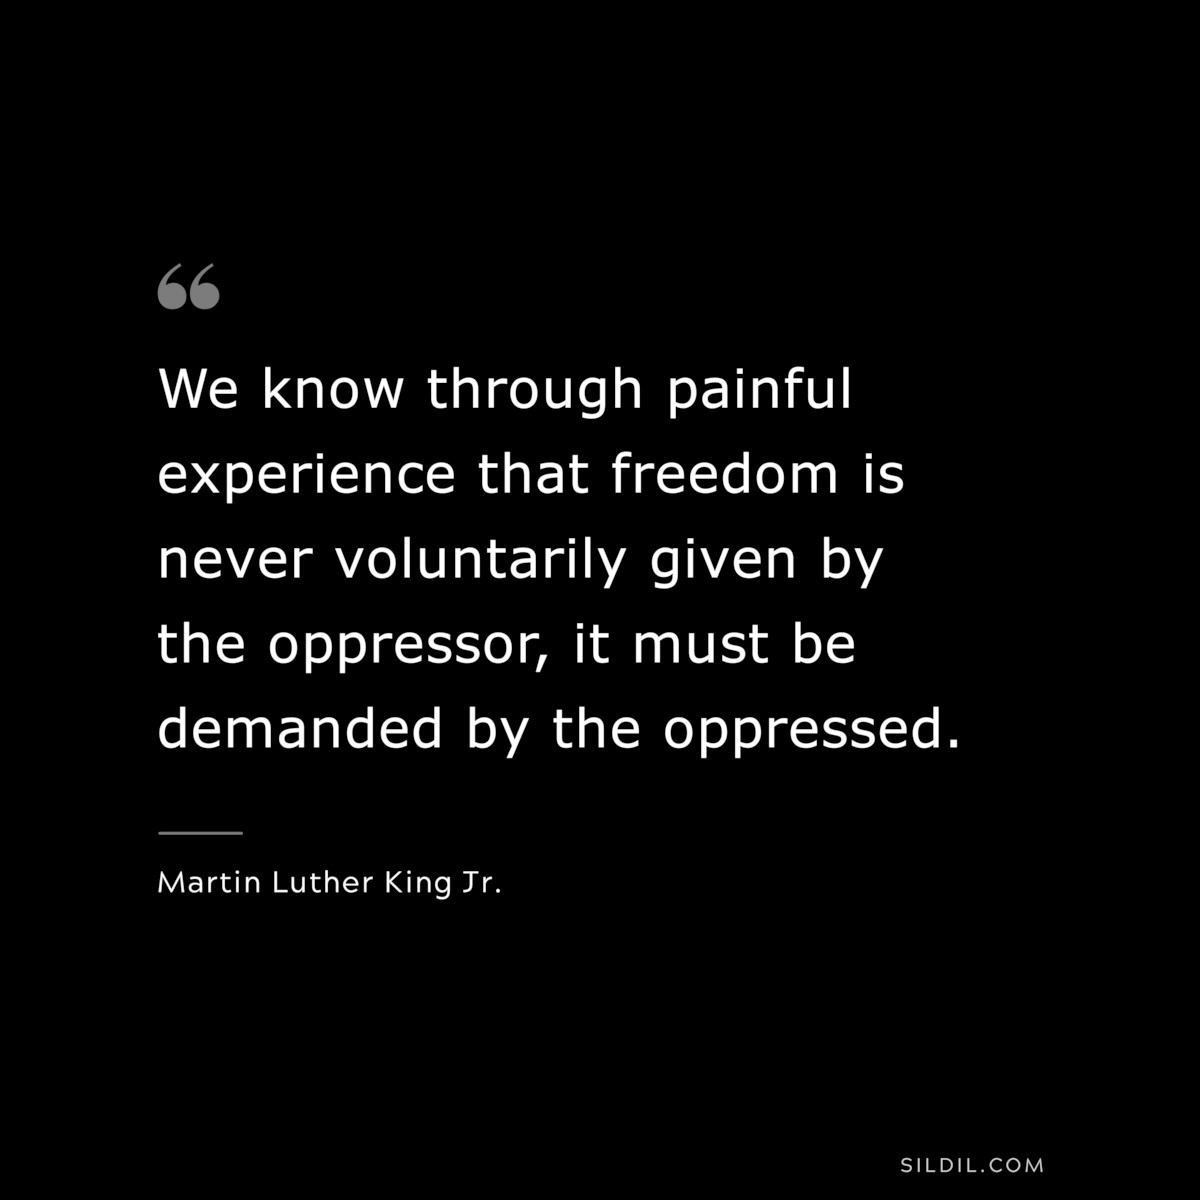 We know through painful experience that freedom is never voluntarily given by the oppressor, it must be demanded by the oppressed. ― Martin Luther King Jr.